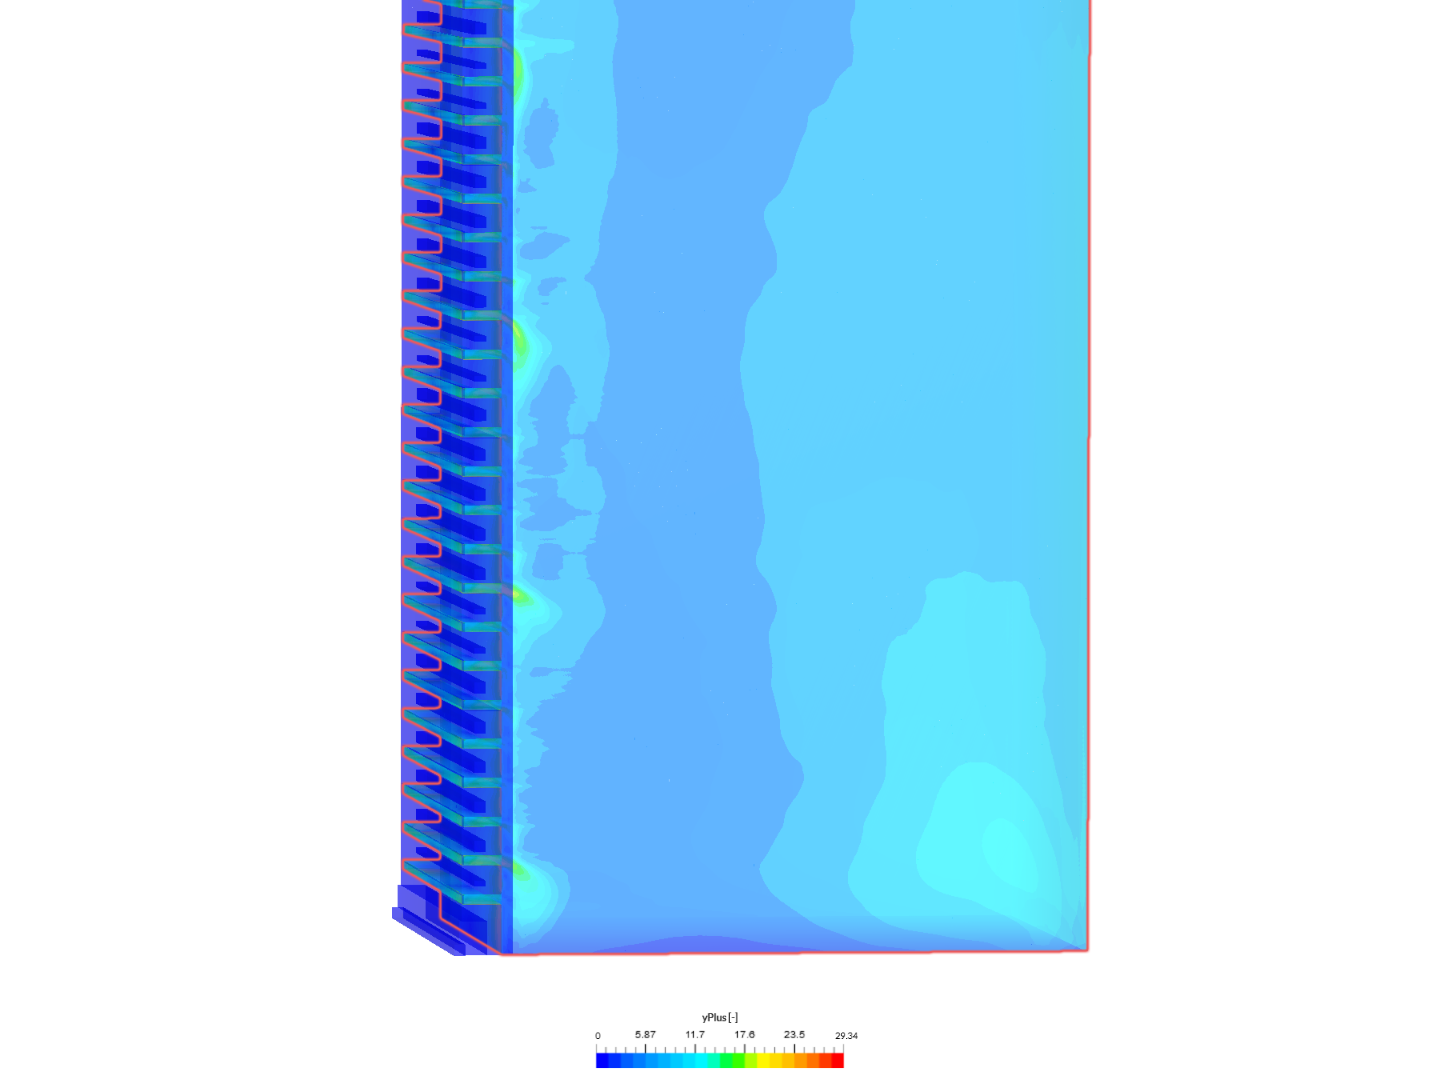 mean_surface_pressure_for_buildings_with_balconies image